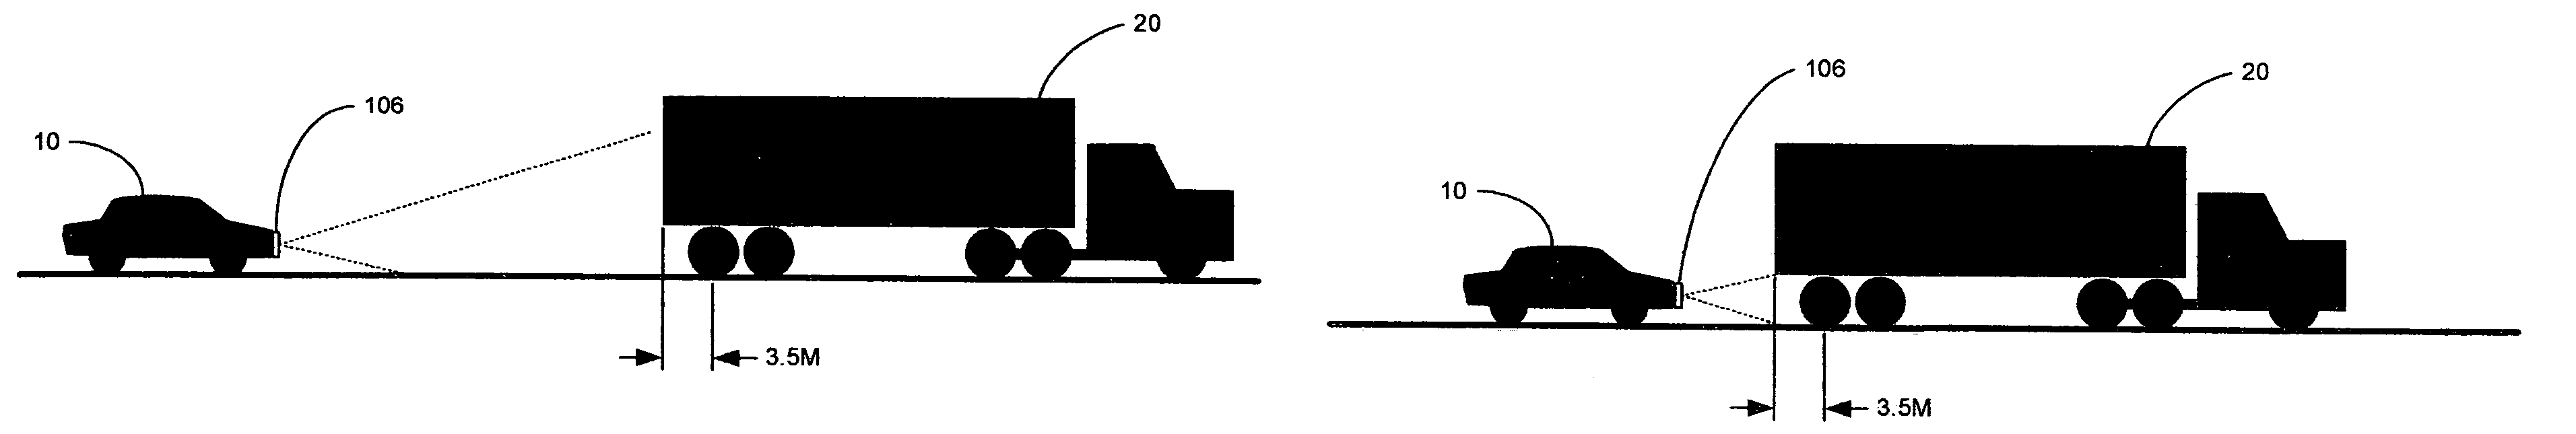 Technique for detecting truck trailer for stop and go adaptive cruise control